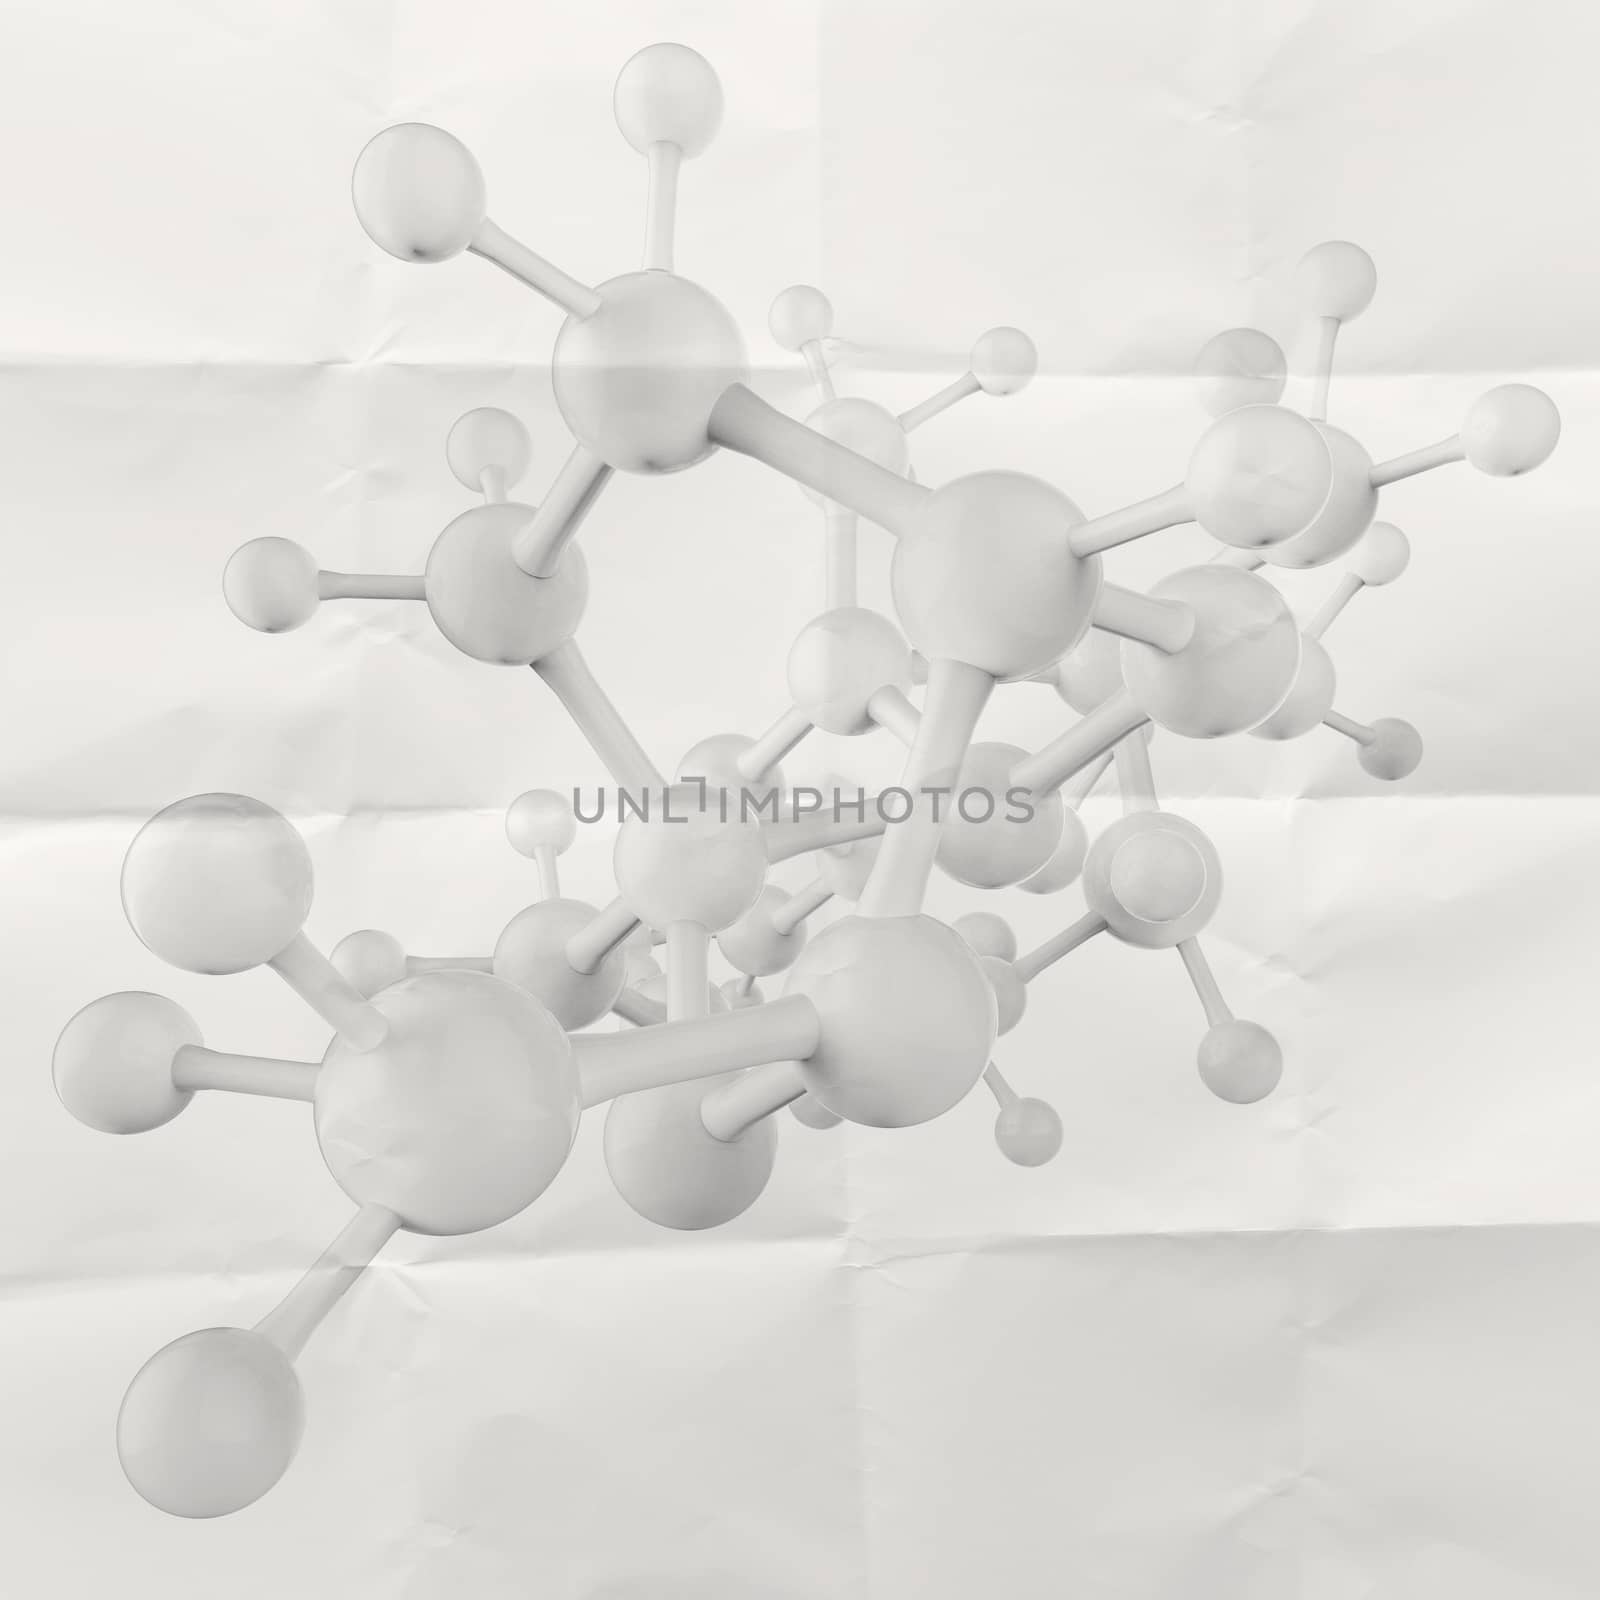 Molecule white 3d on crumpled paper background as concept